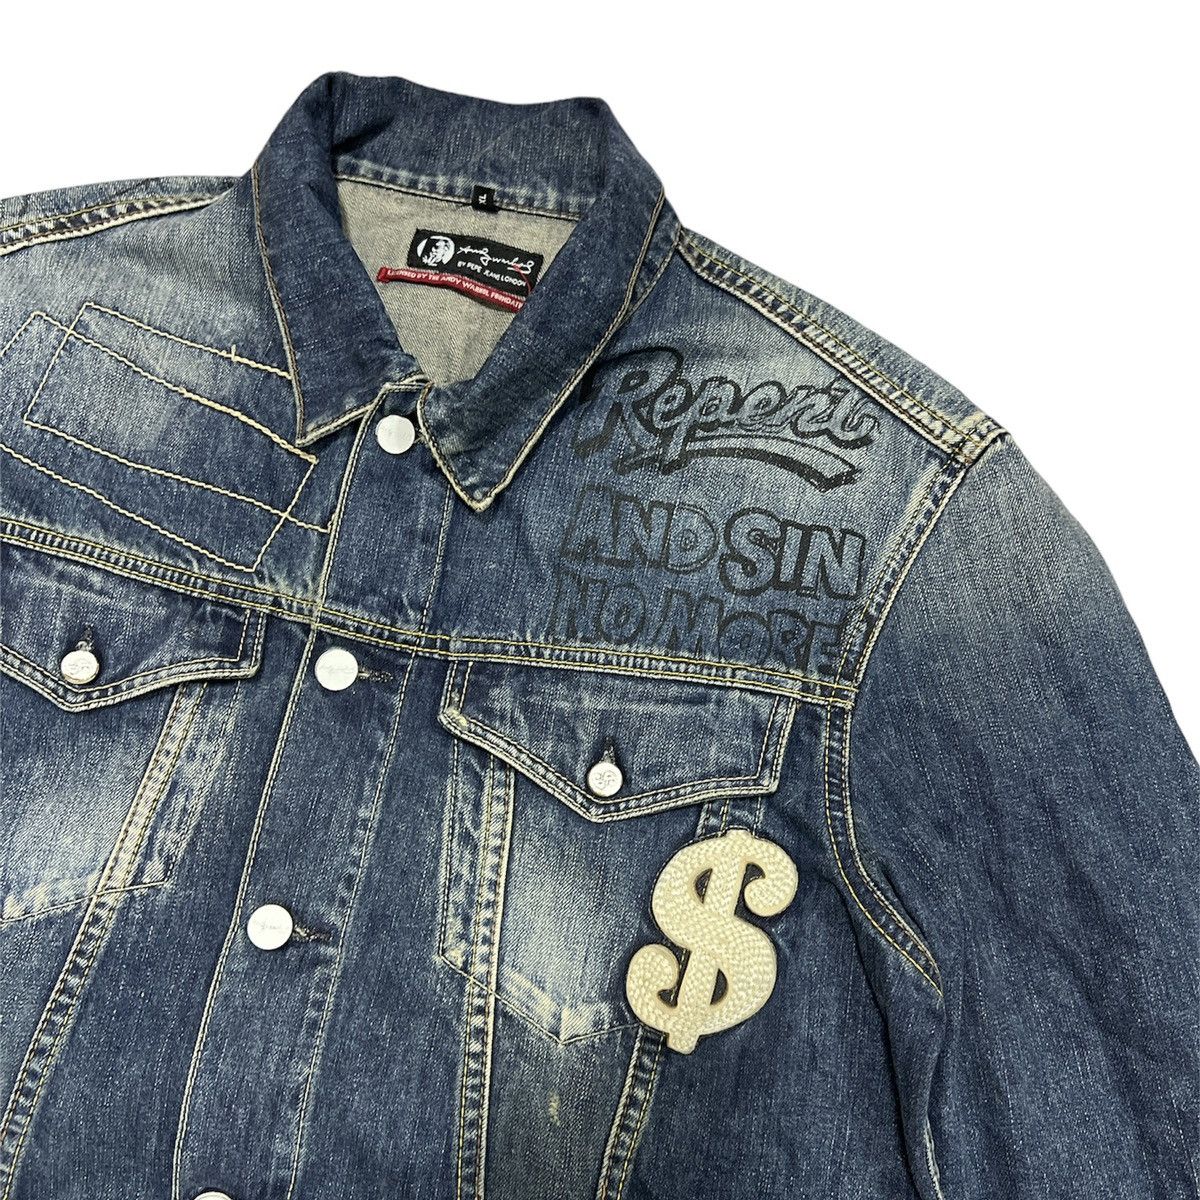 Andy Warhol by Pepe Jeans Type III Jacket - 3